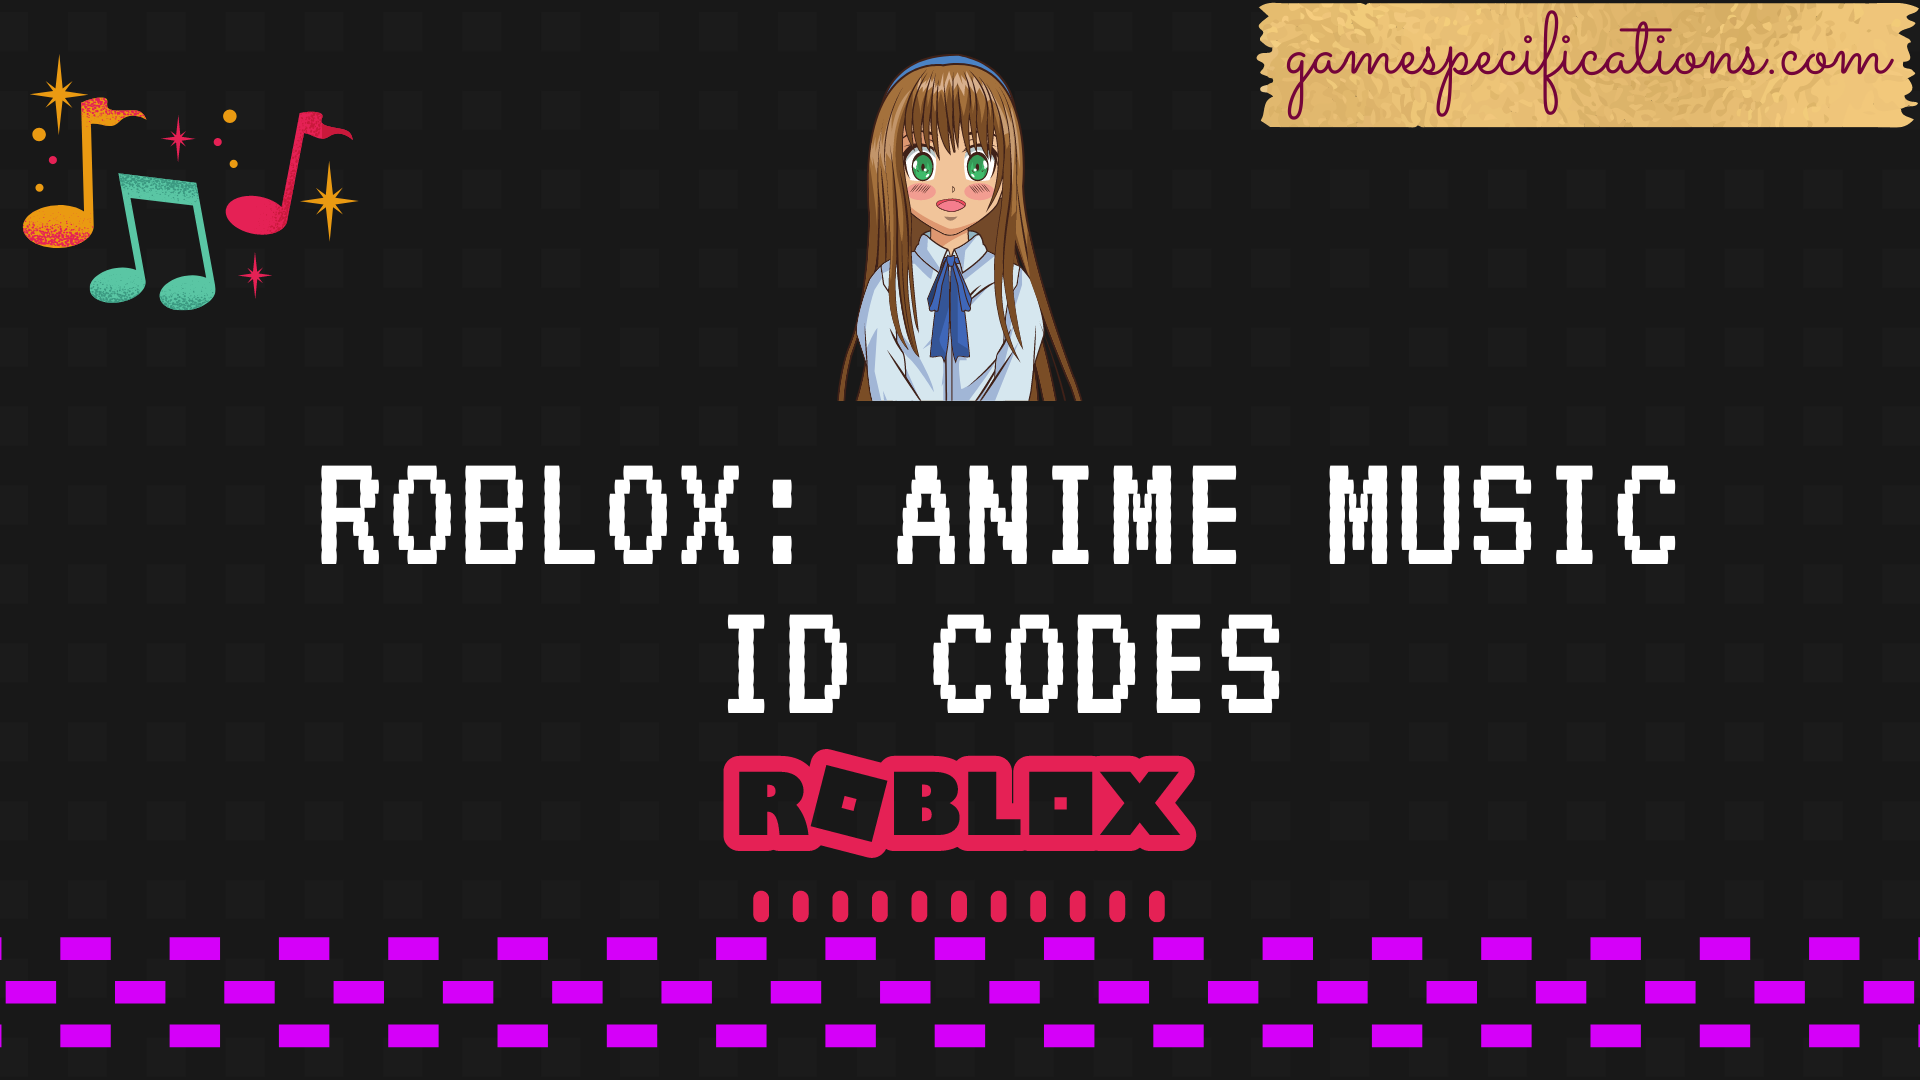 Club Roblox Image Id Codes - Roblox Music Codes Complete List Of Over